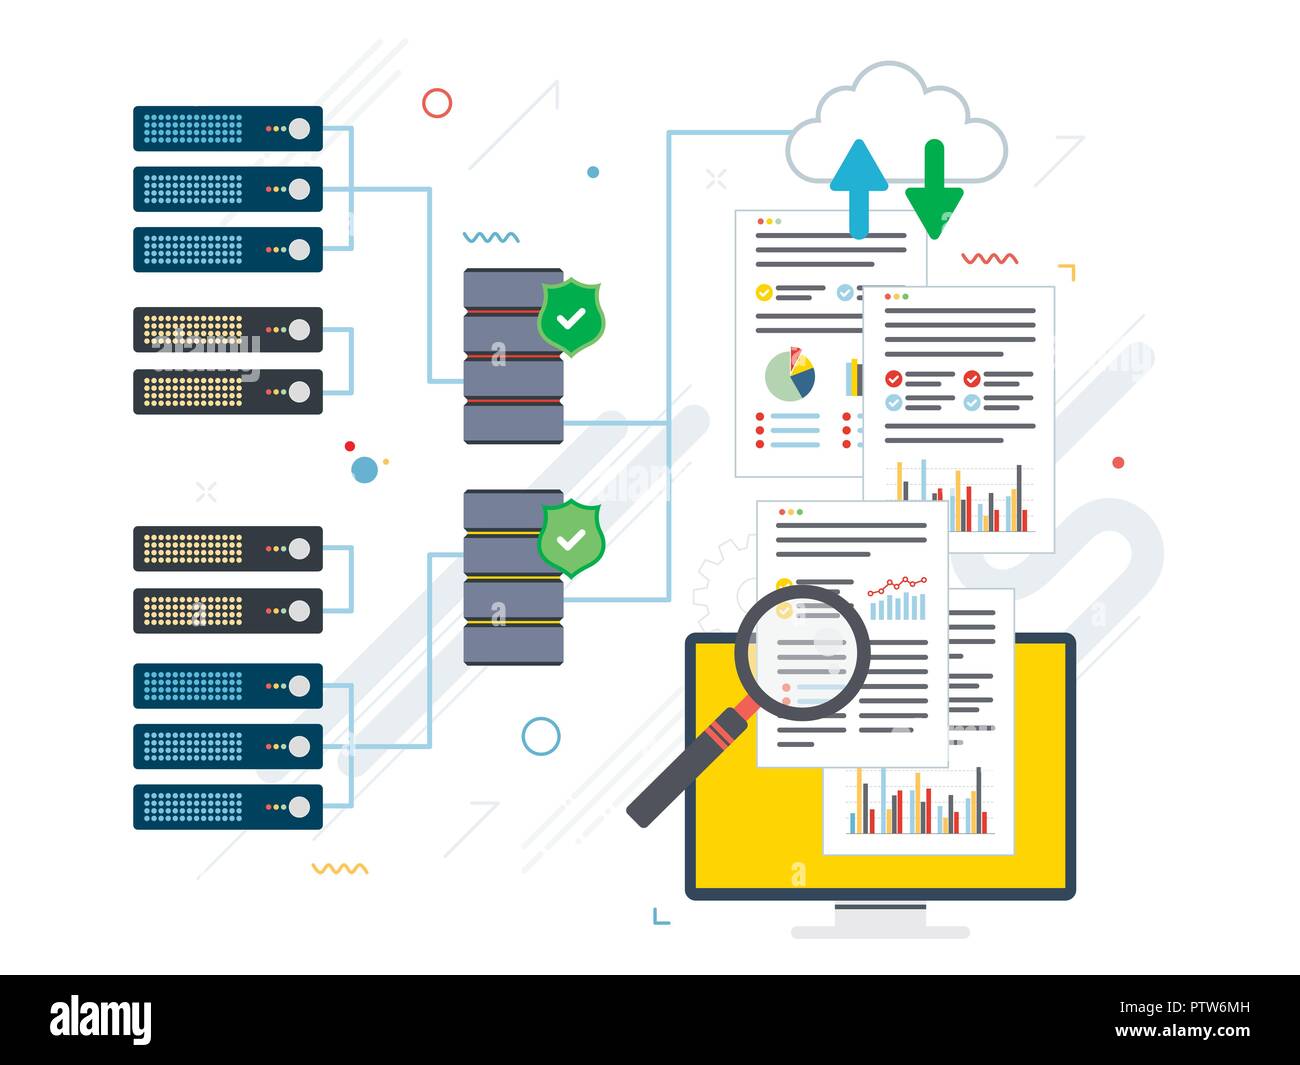 Laptop accessing data from cloud computers. Concepts big data analysis, data mining, cloud computing devices, data network and business intelligence.  Stock Vector